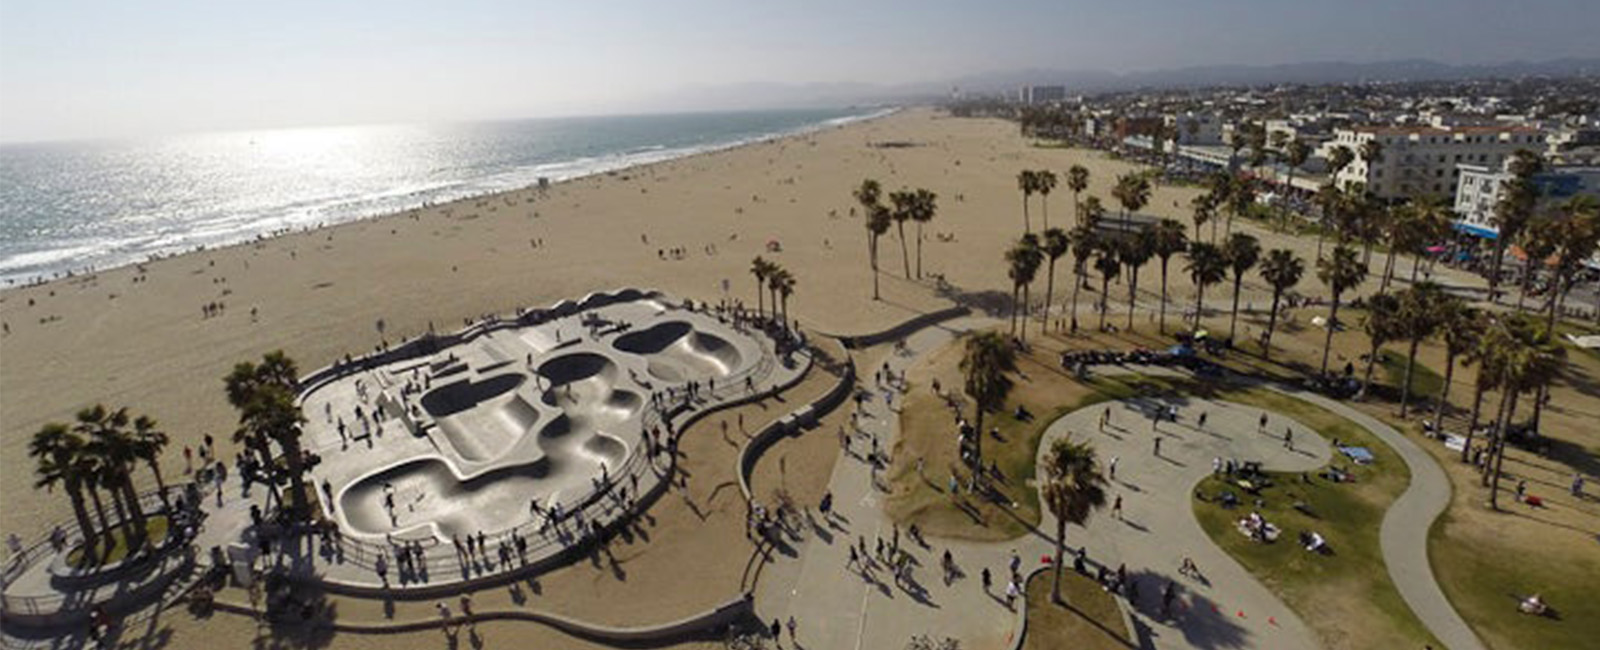 An aerial view of a skate park at a long flat sandy beach with the shimmering ocean in the background